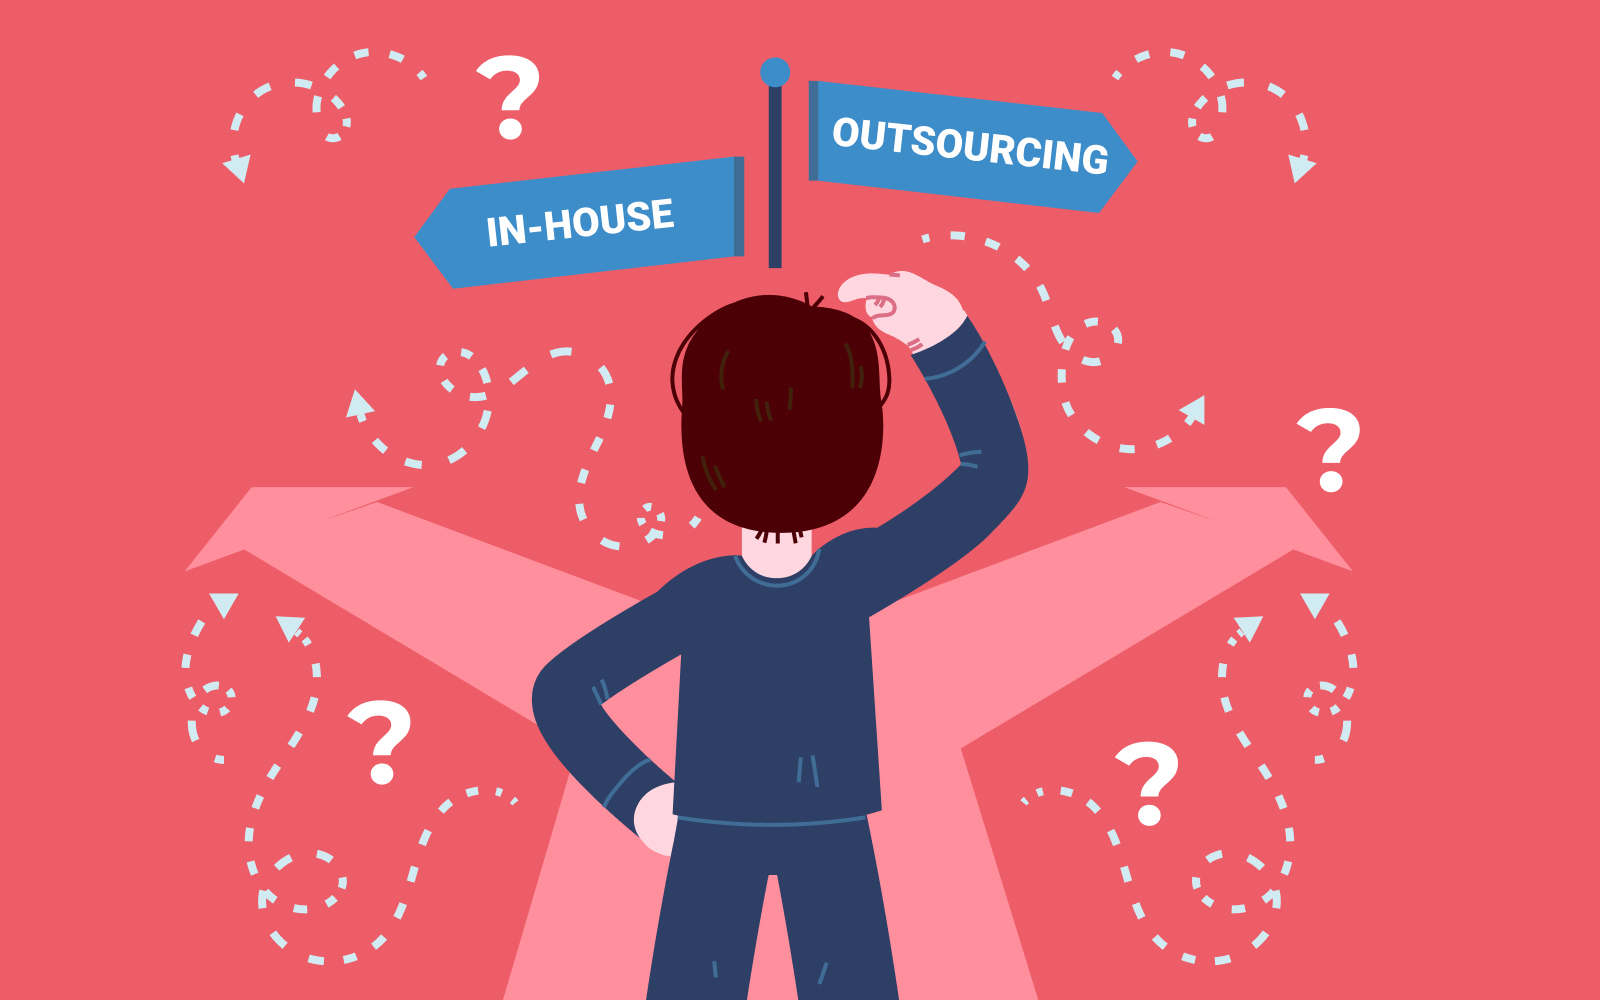 In-house team or Outsourcing? What to choose?